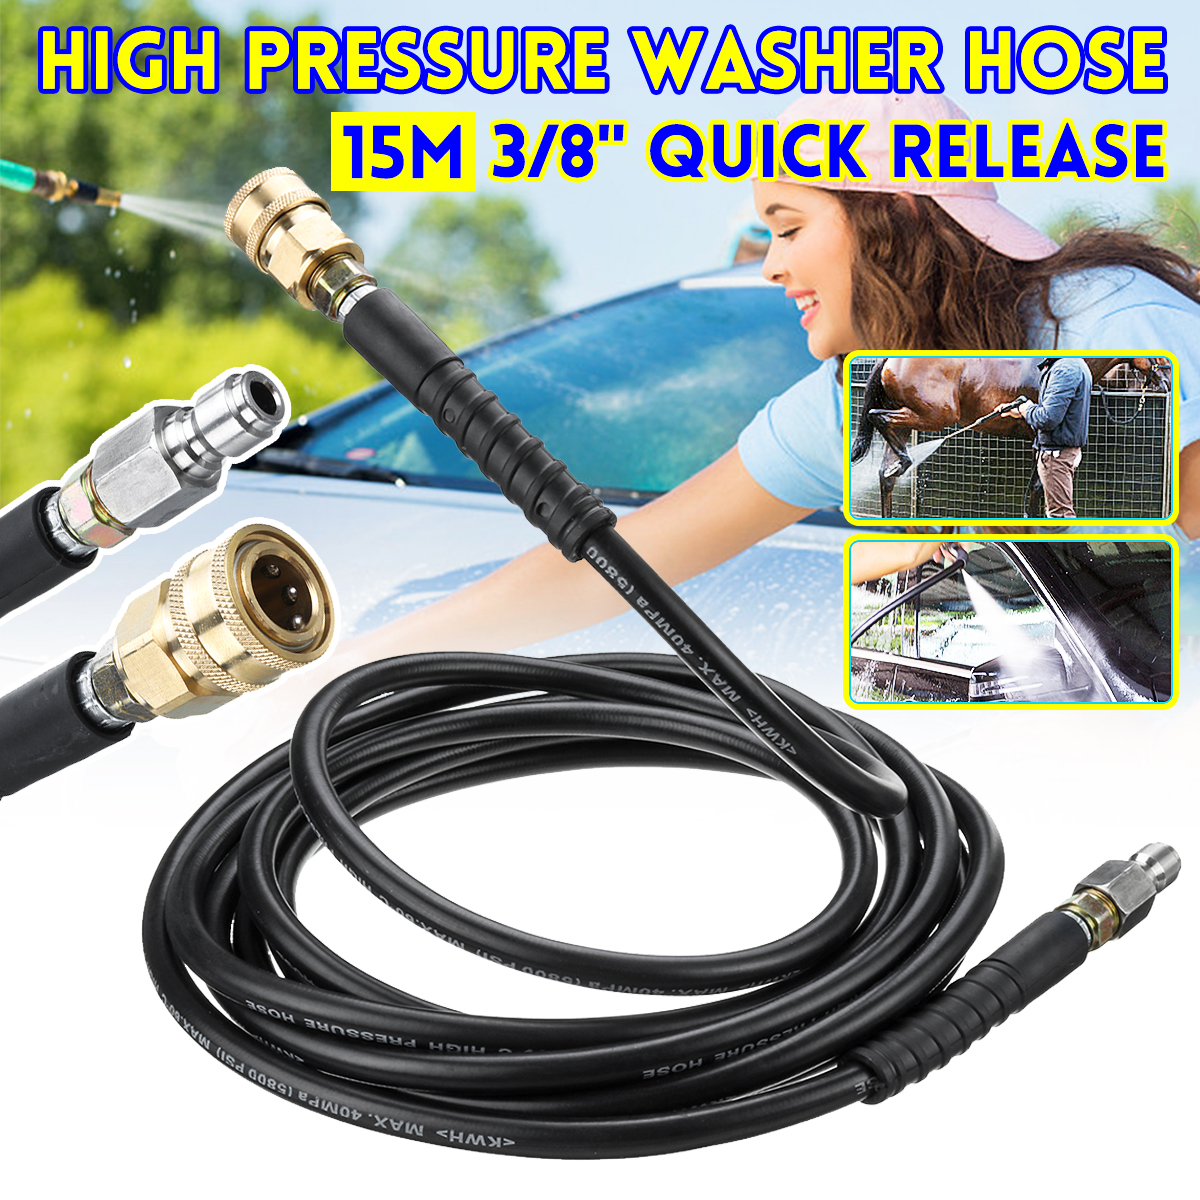 15M-38-Inch-Quick-Release-Hose-40MPa-High-Pressure-Washer-Hose-Cleaning-Tube-1558766-1